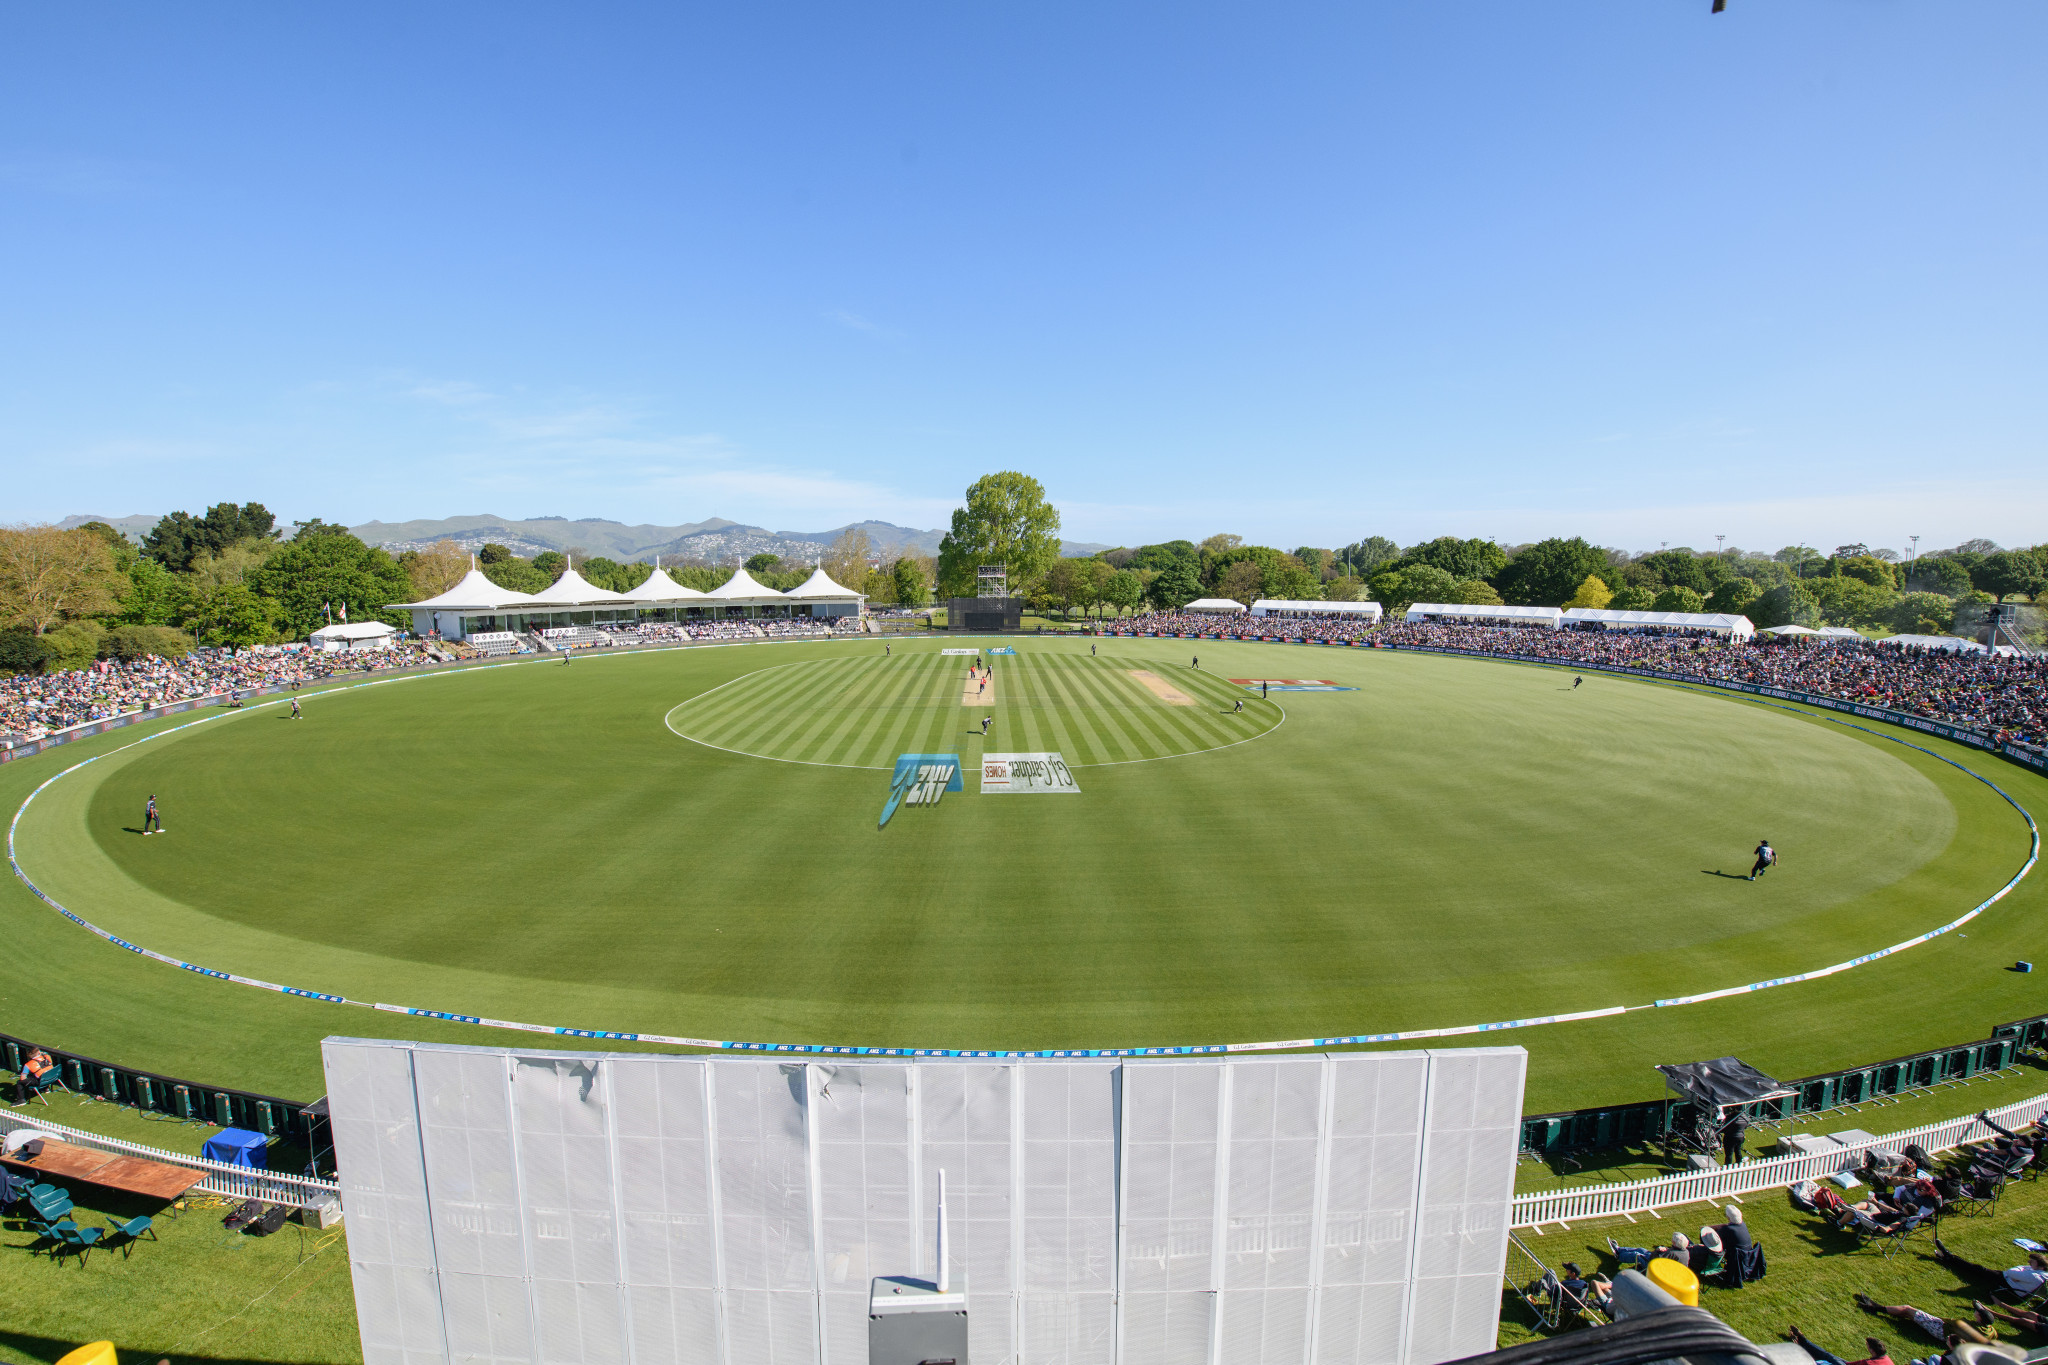 Christchurch's Hagley Oval will host the 2021 Women's Cricket World Cup final ©Getty Images